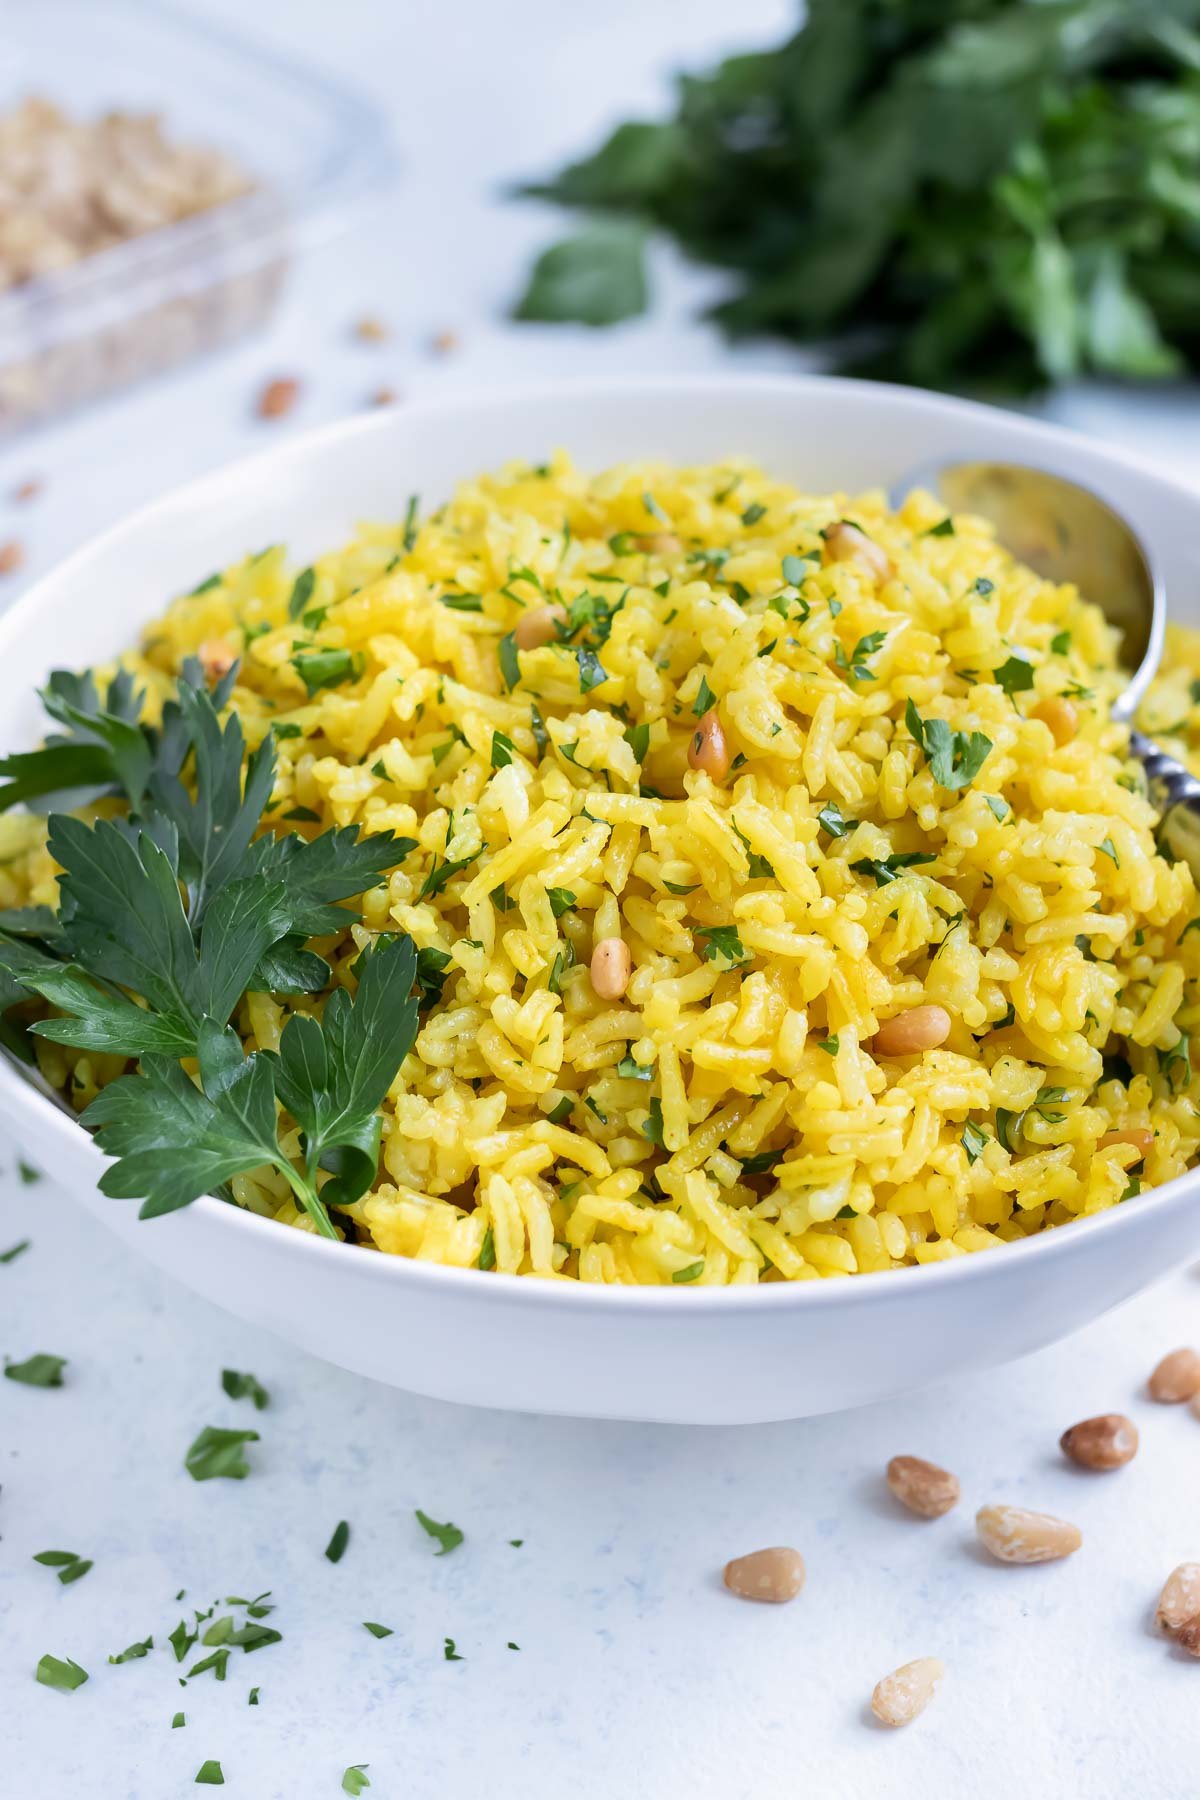 Mediterranean Yellow Rice is served from a bowl on the counter.